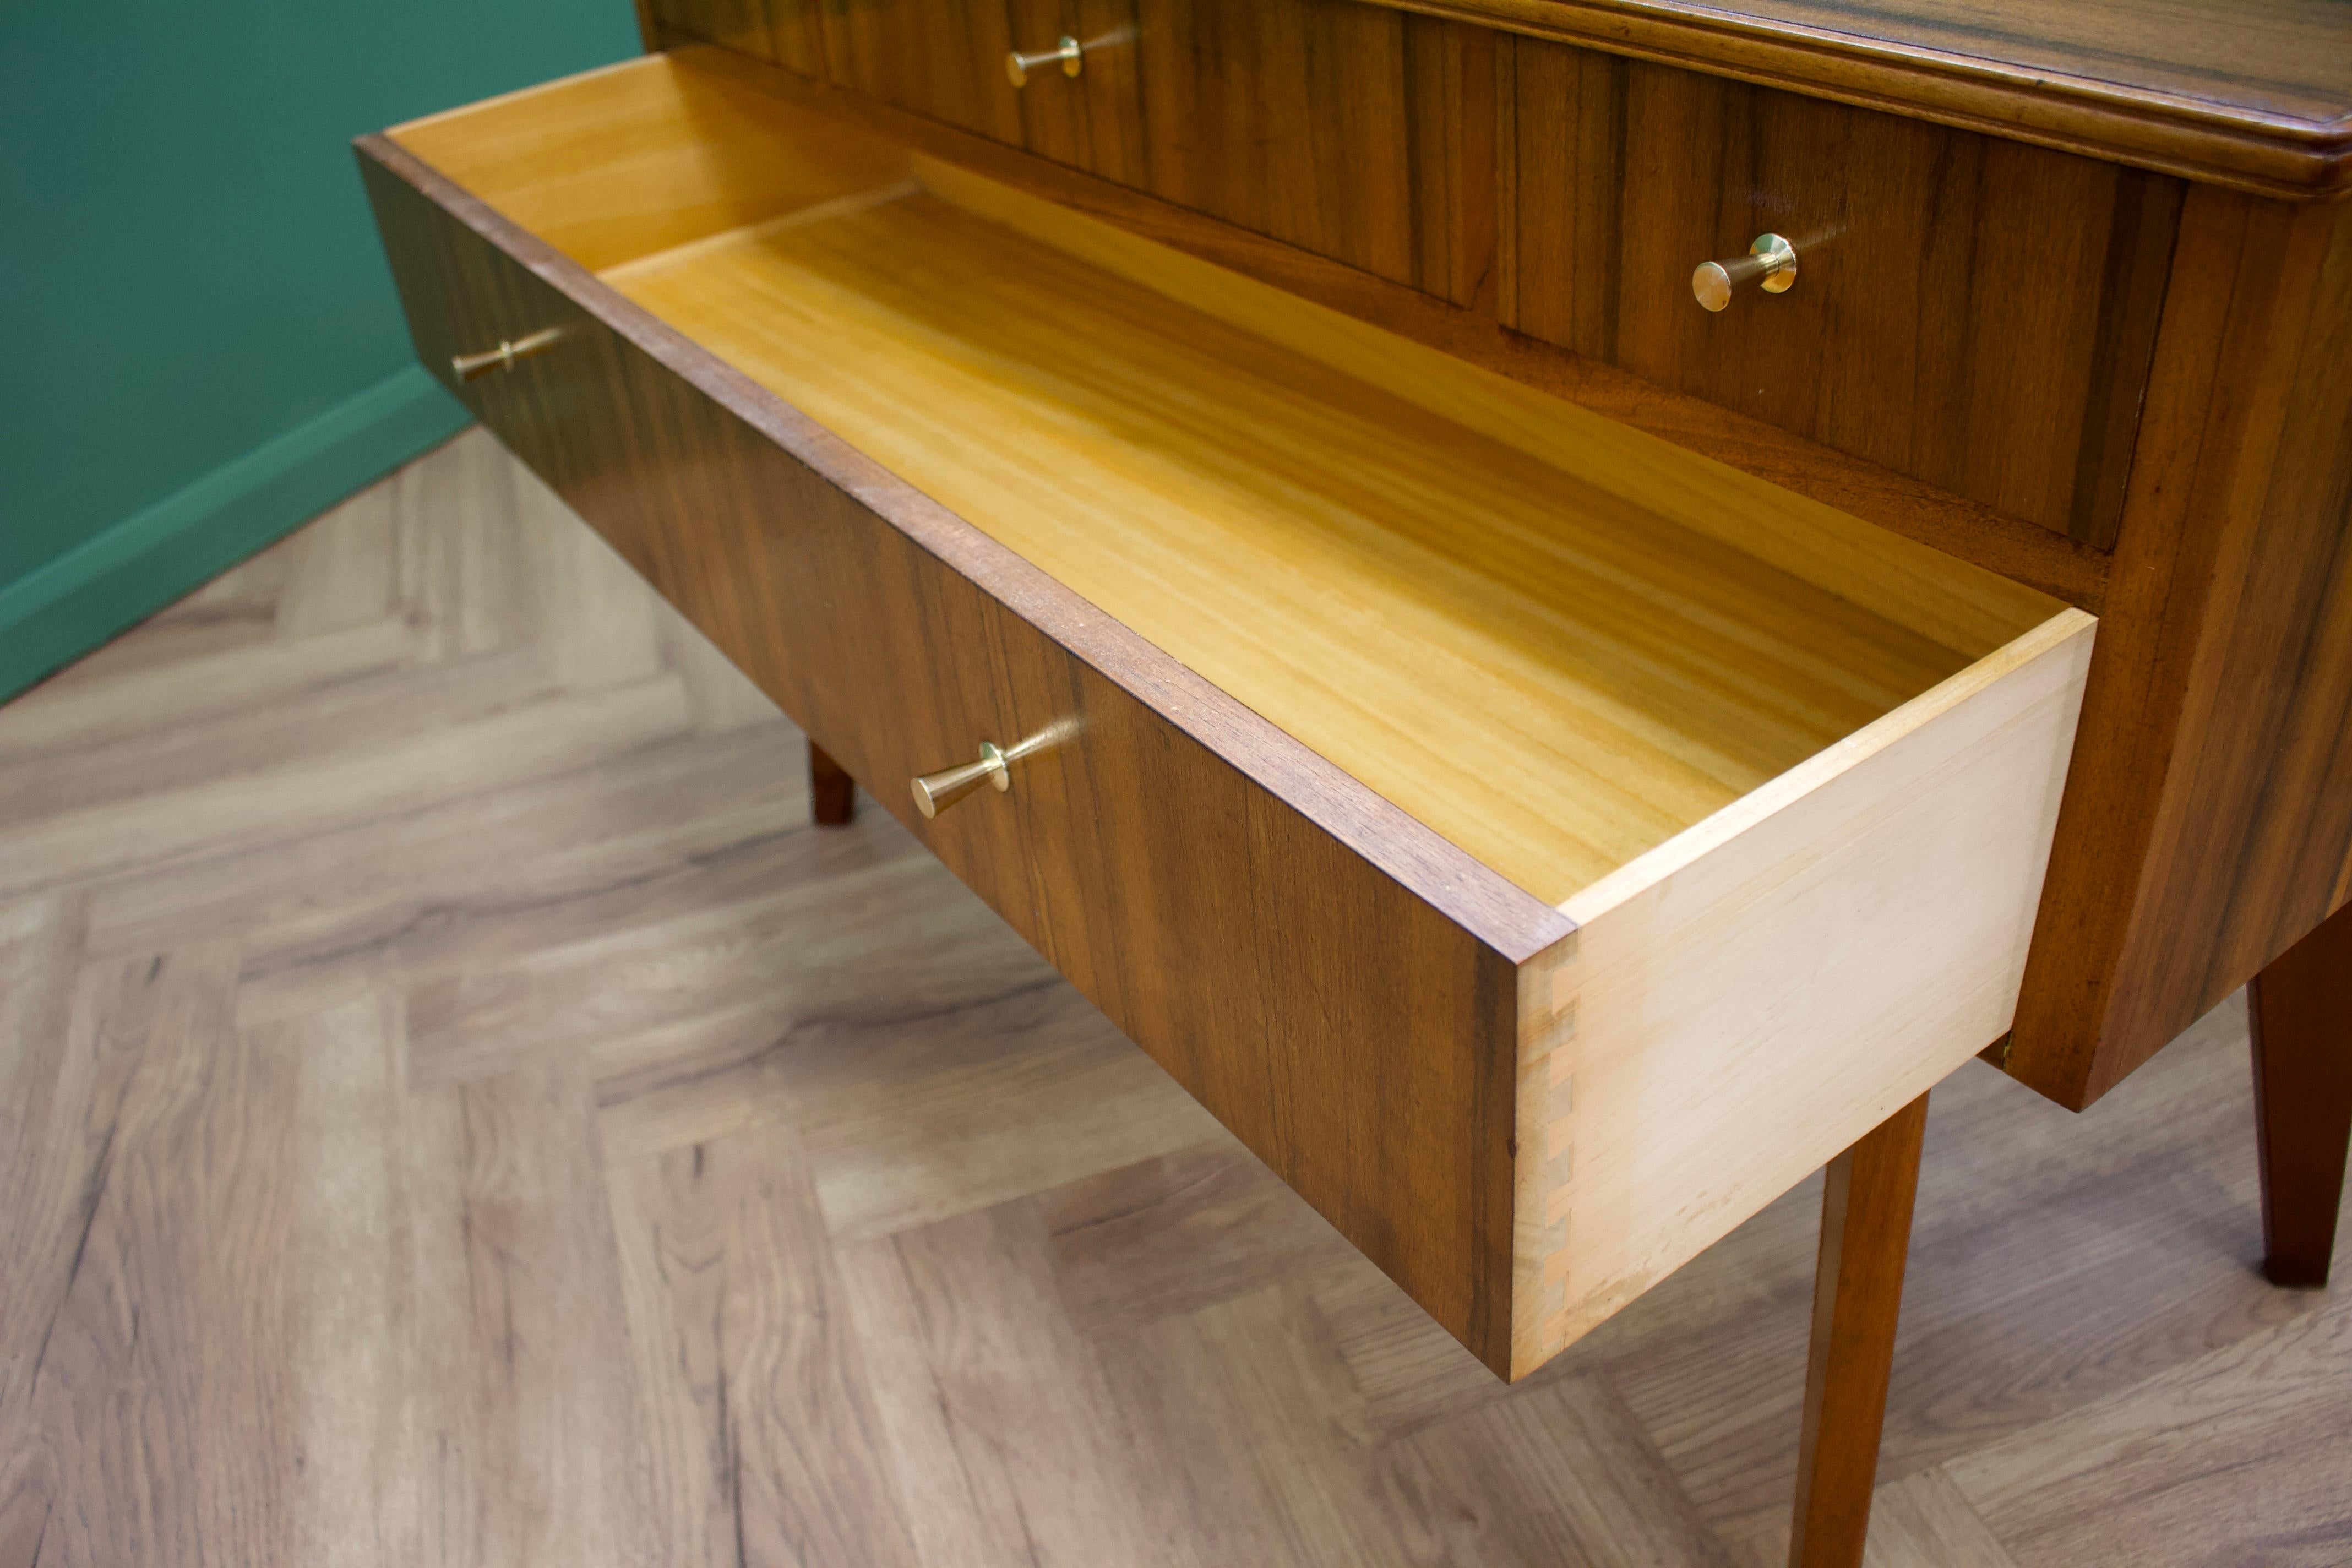 British Midcentury Walnut Compact Sideboard from Morris of Glasgow, 1950s For Sale